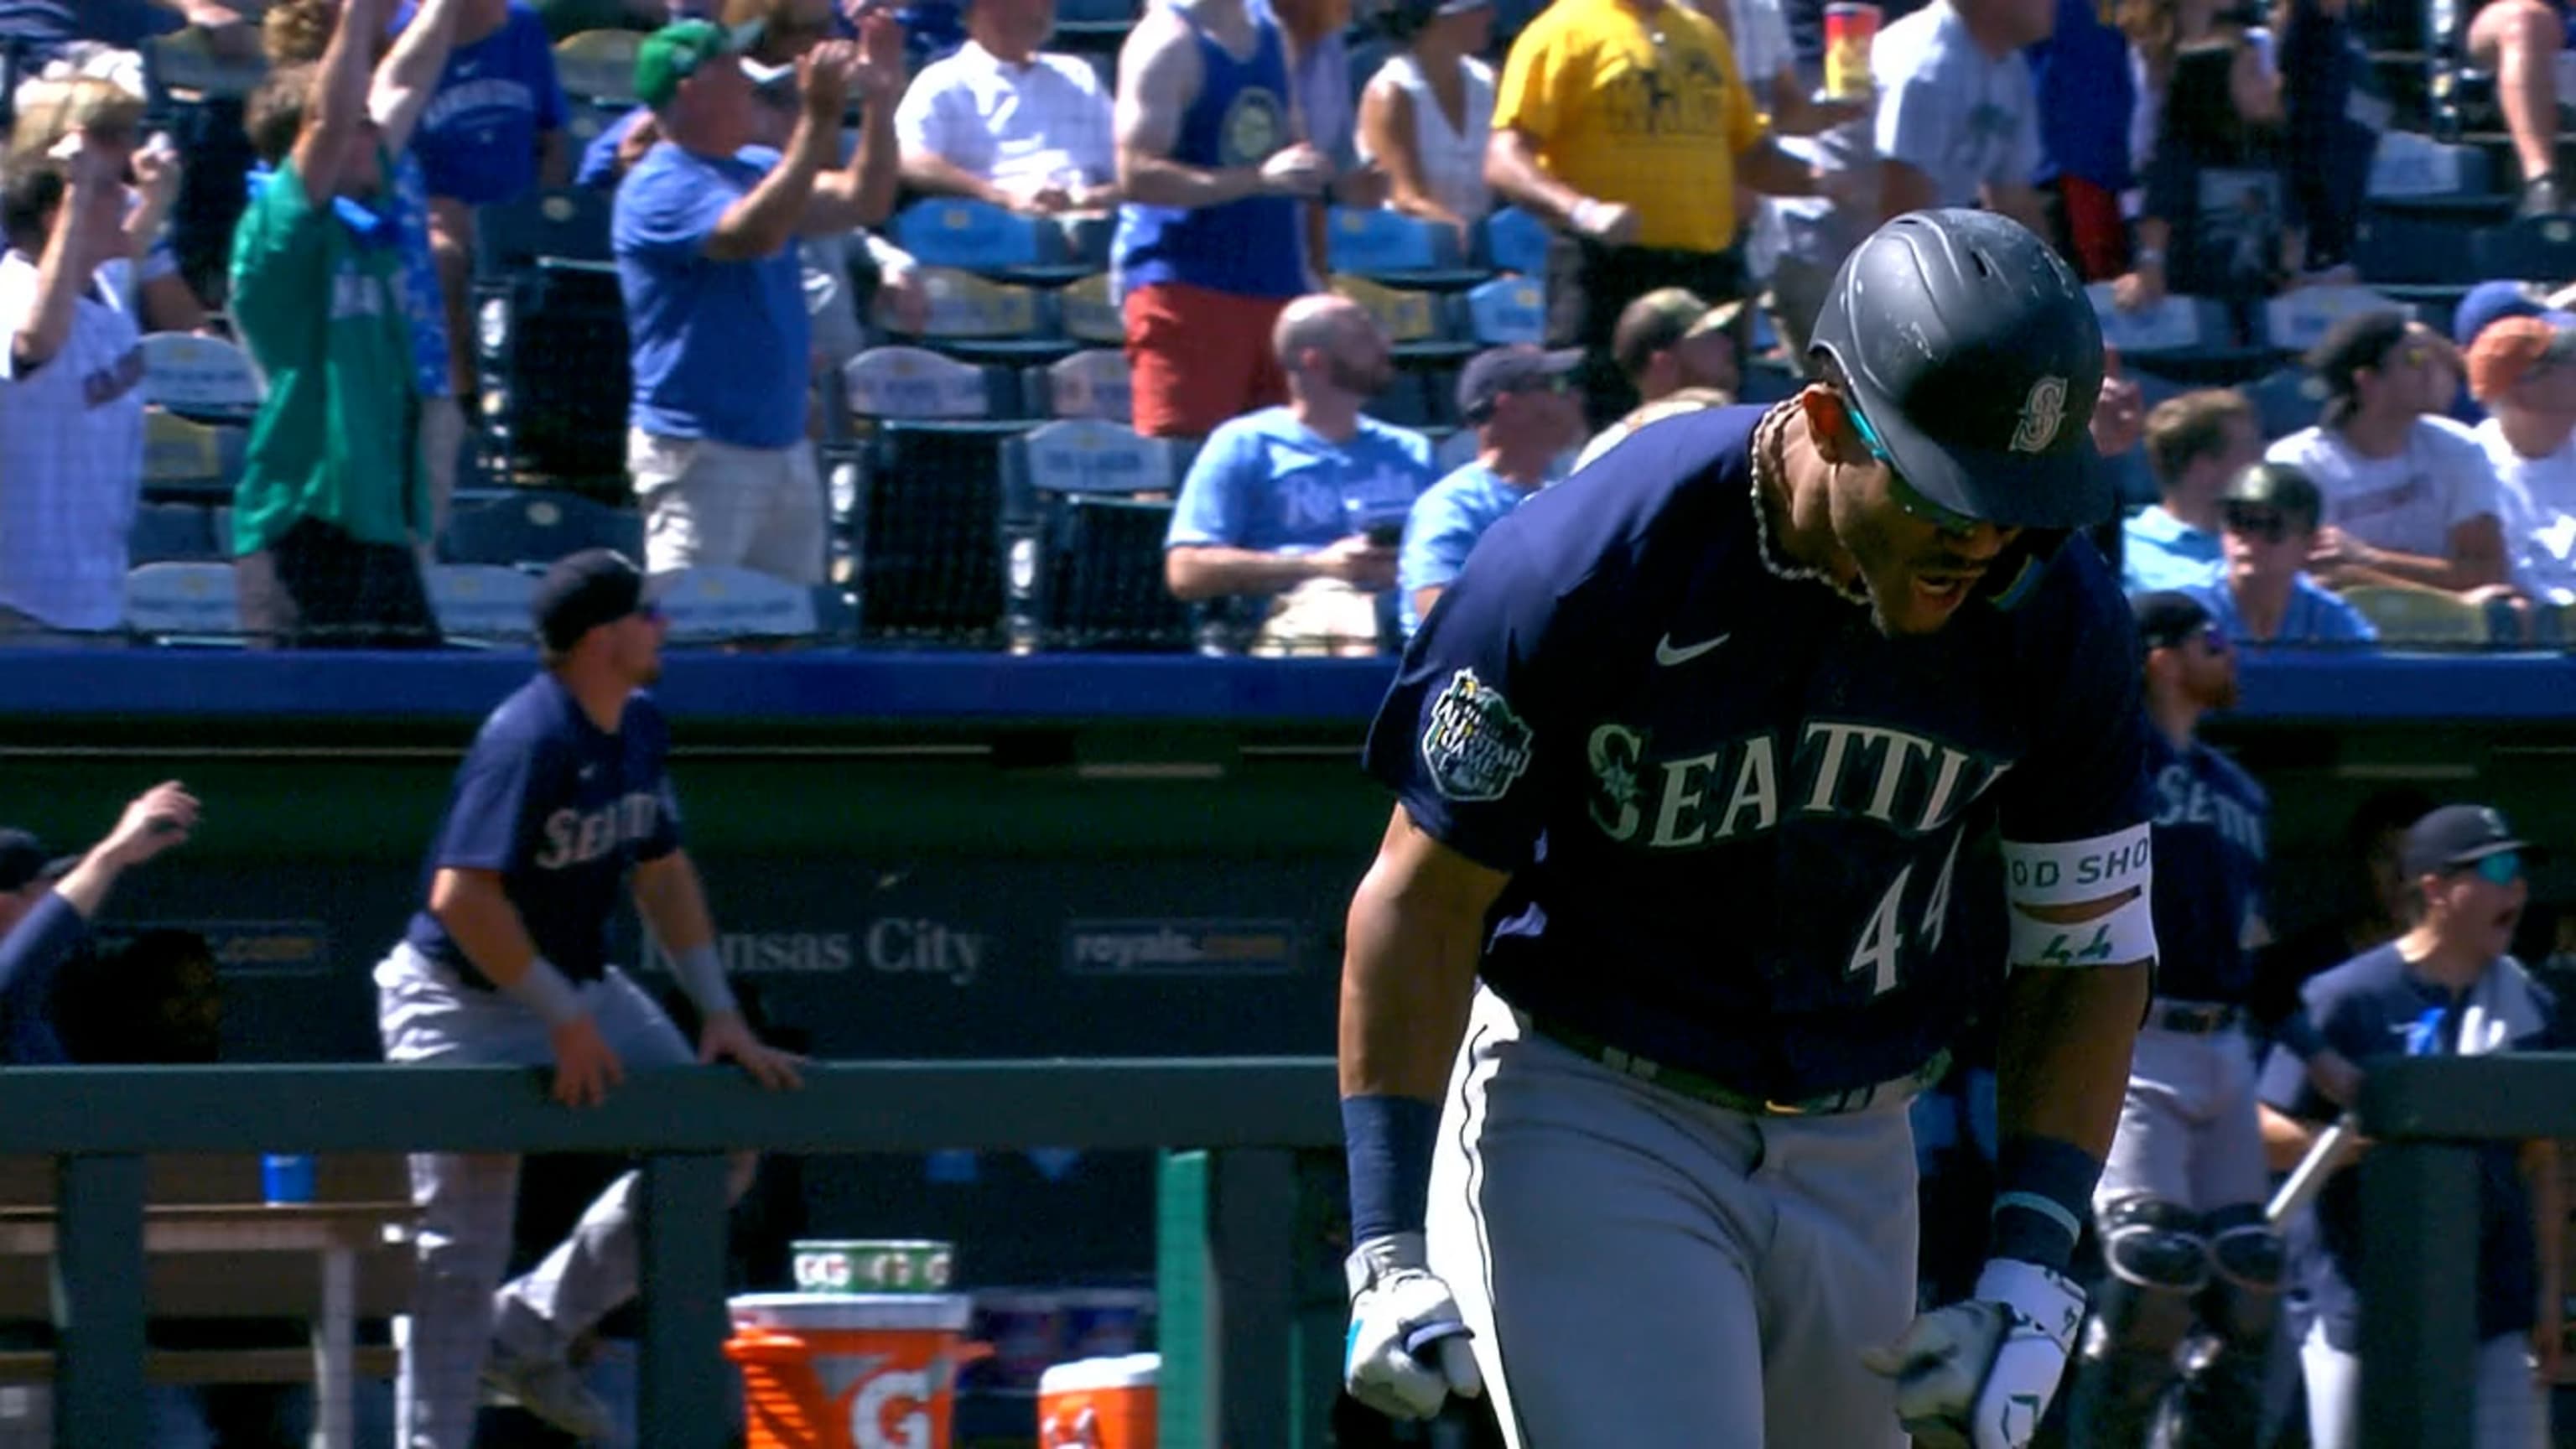 Rodriguez has 5 hits, 5 RBIs and go-ahead 3-run shot in the eighth as  Mariners beat Royals 6-4 - ABC News